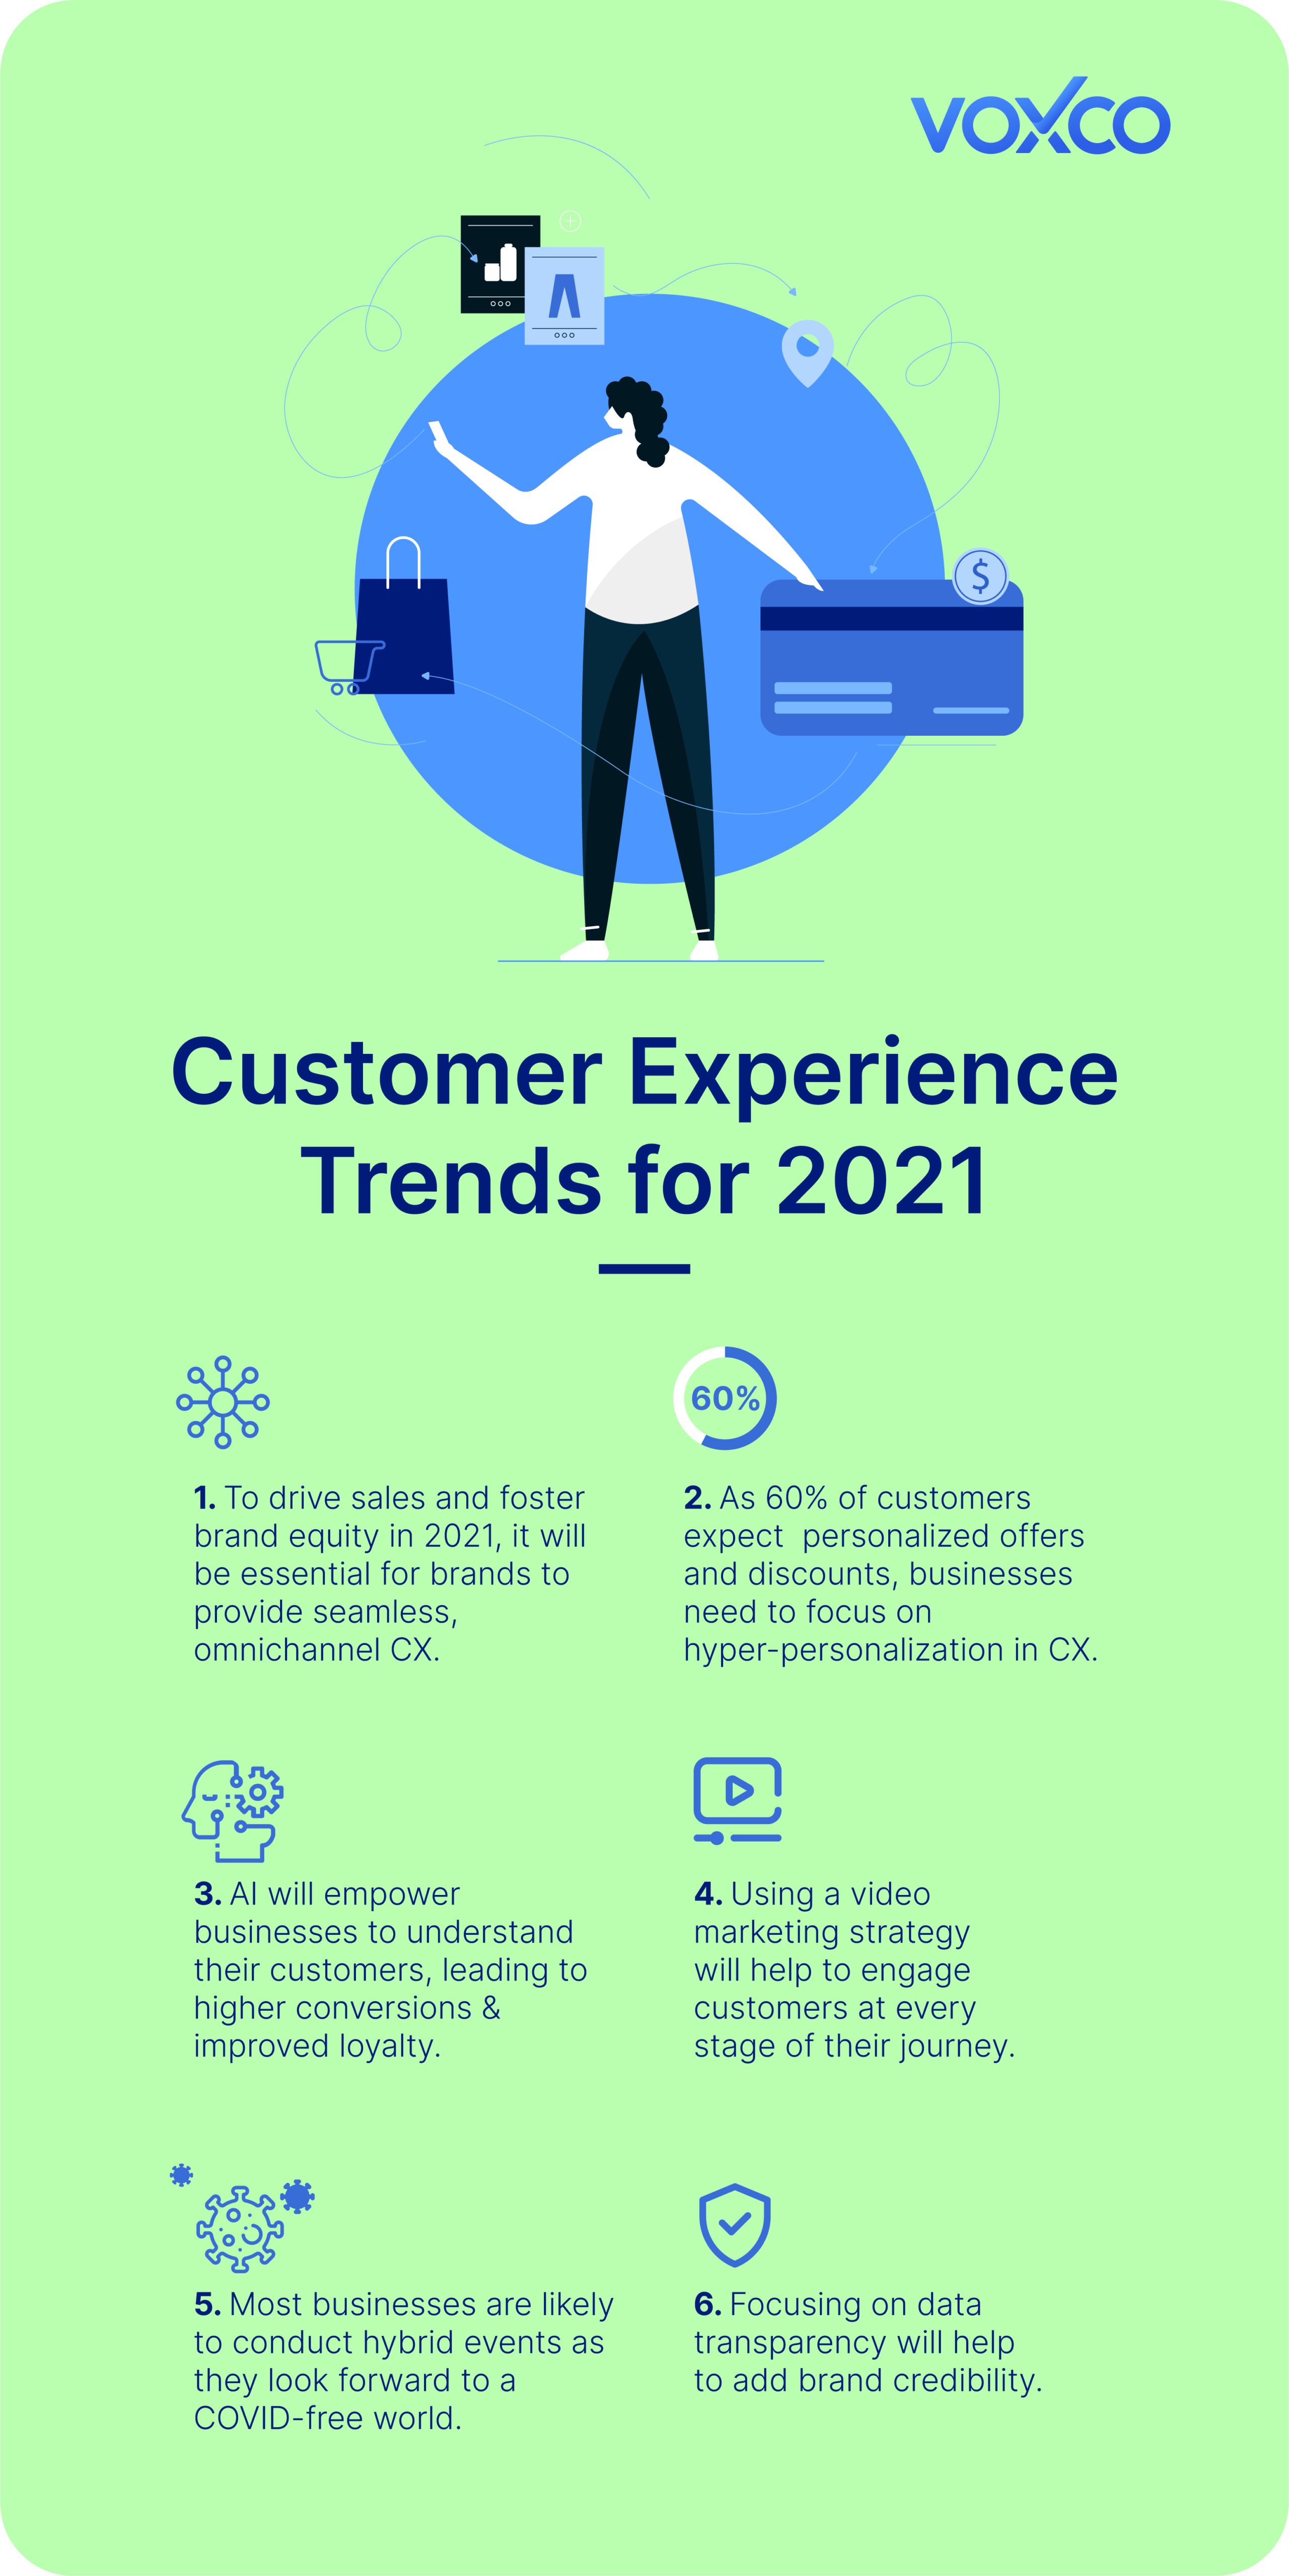 Customer Experience Trends to Watch out For in 2021 05 1 1 2 2 1 1